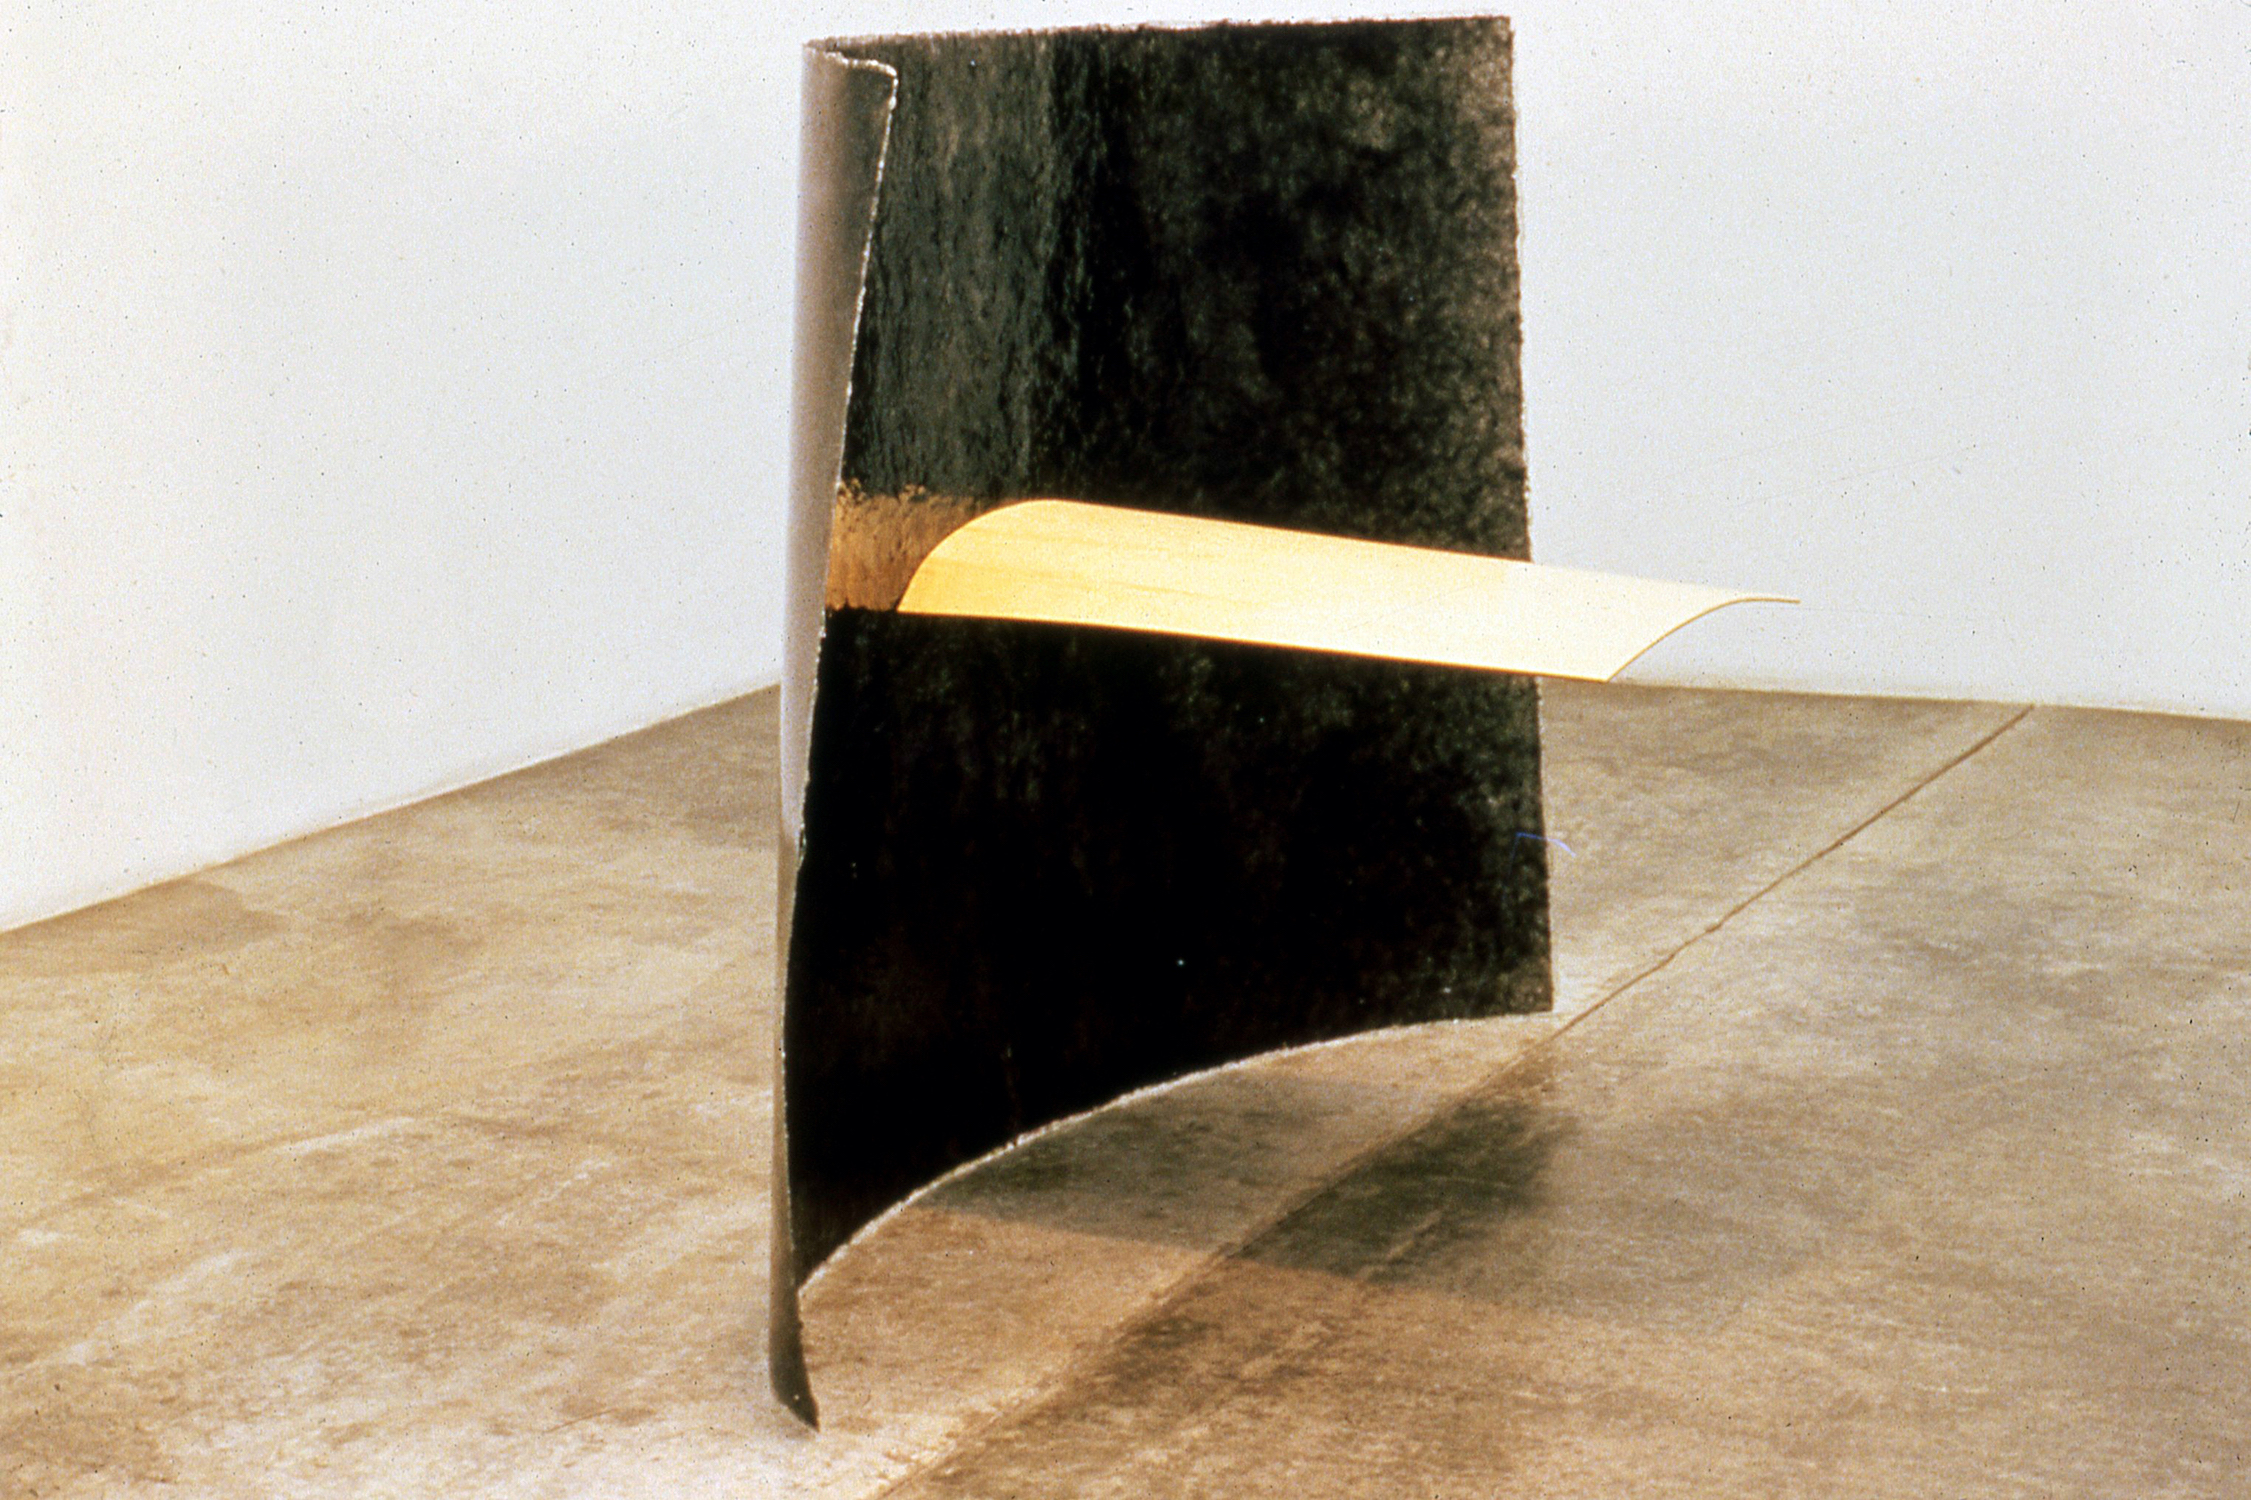  Levity (1998), synthetic polymer resin, pigment and wood 